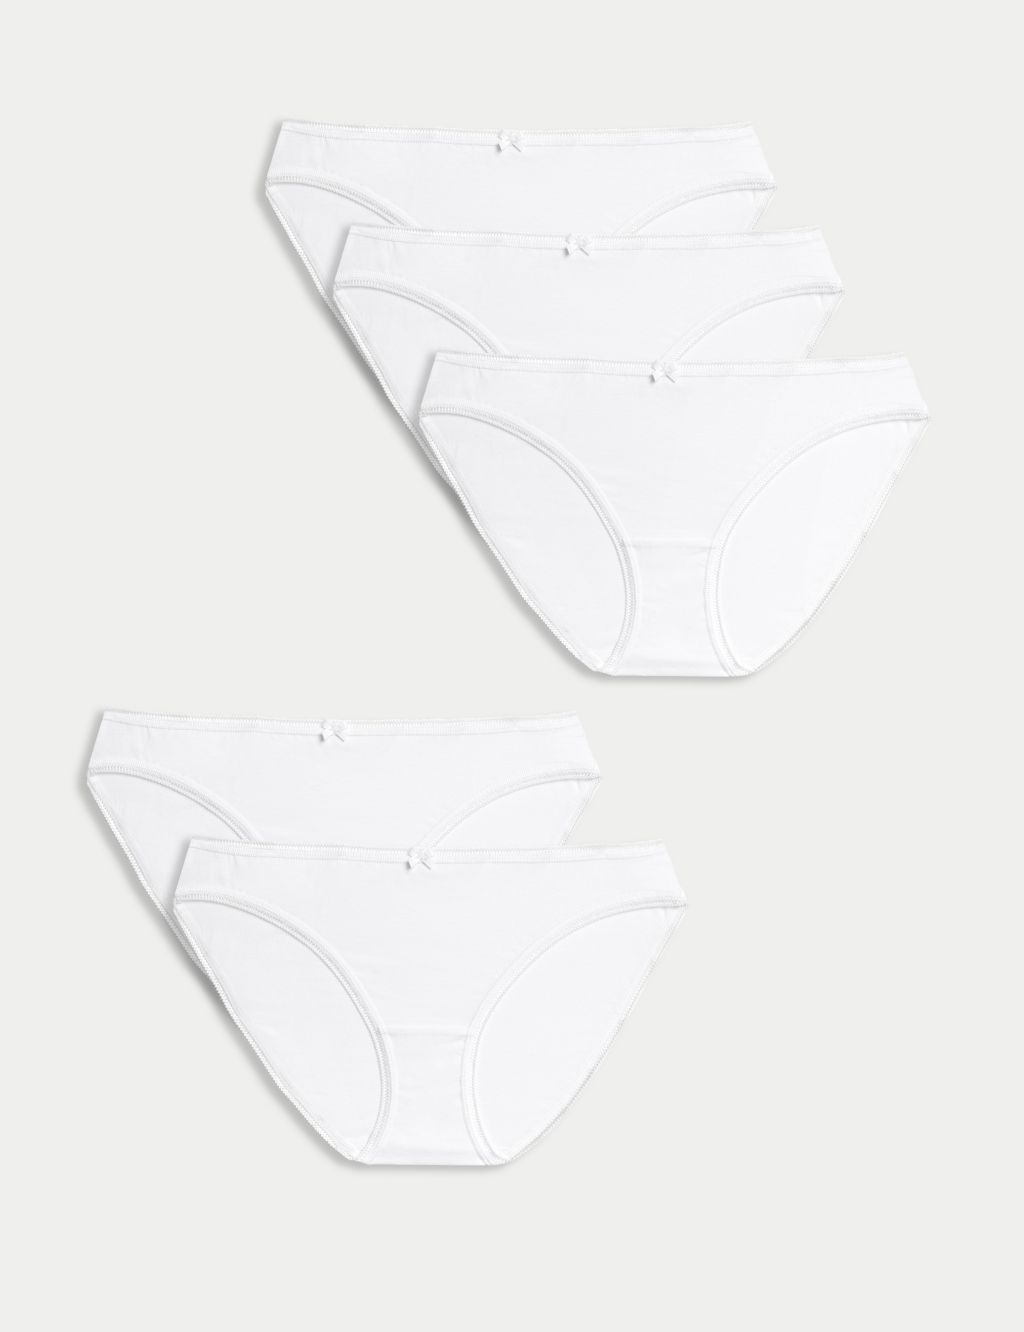 Pack of 2 pairs of Coton Plus Féminine midi knickers in white